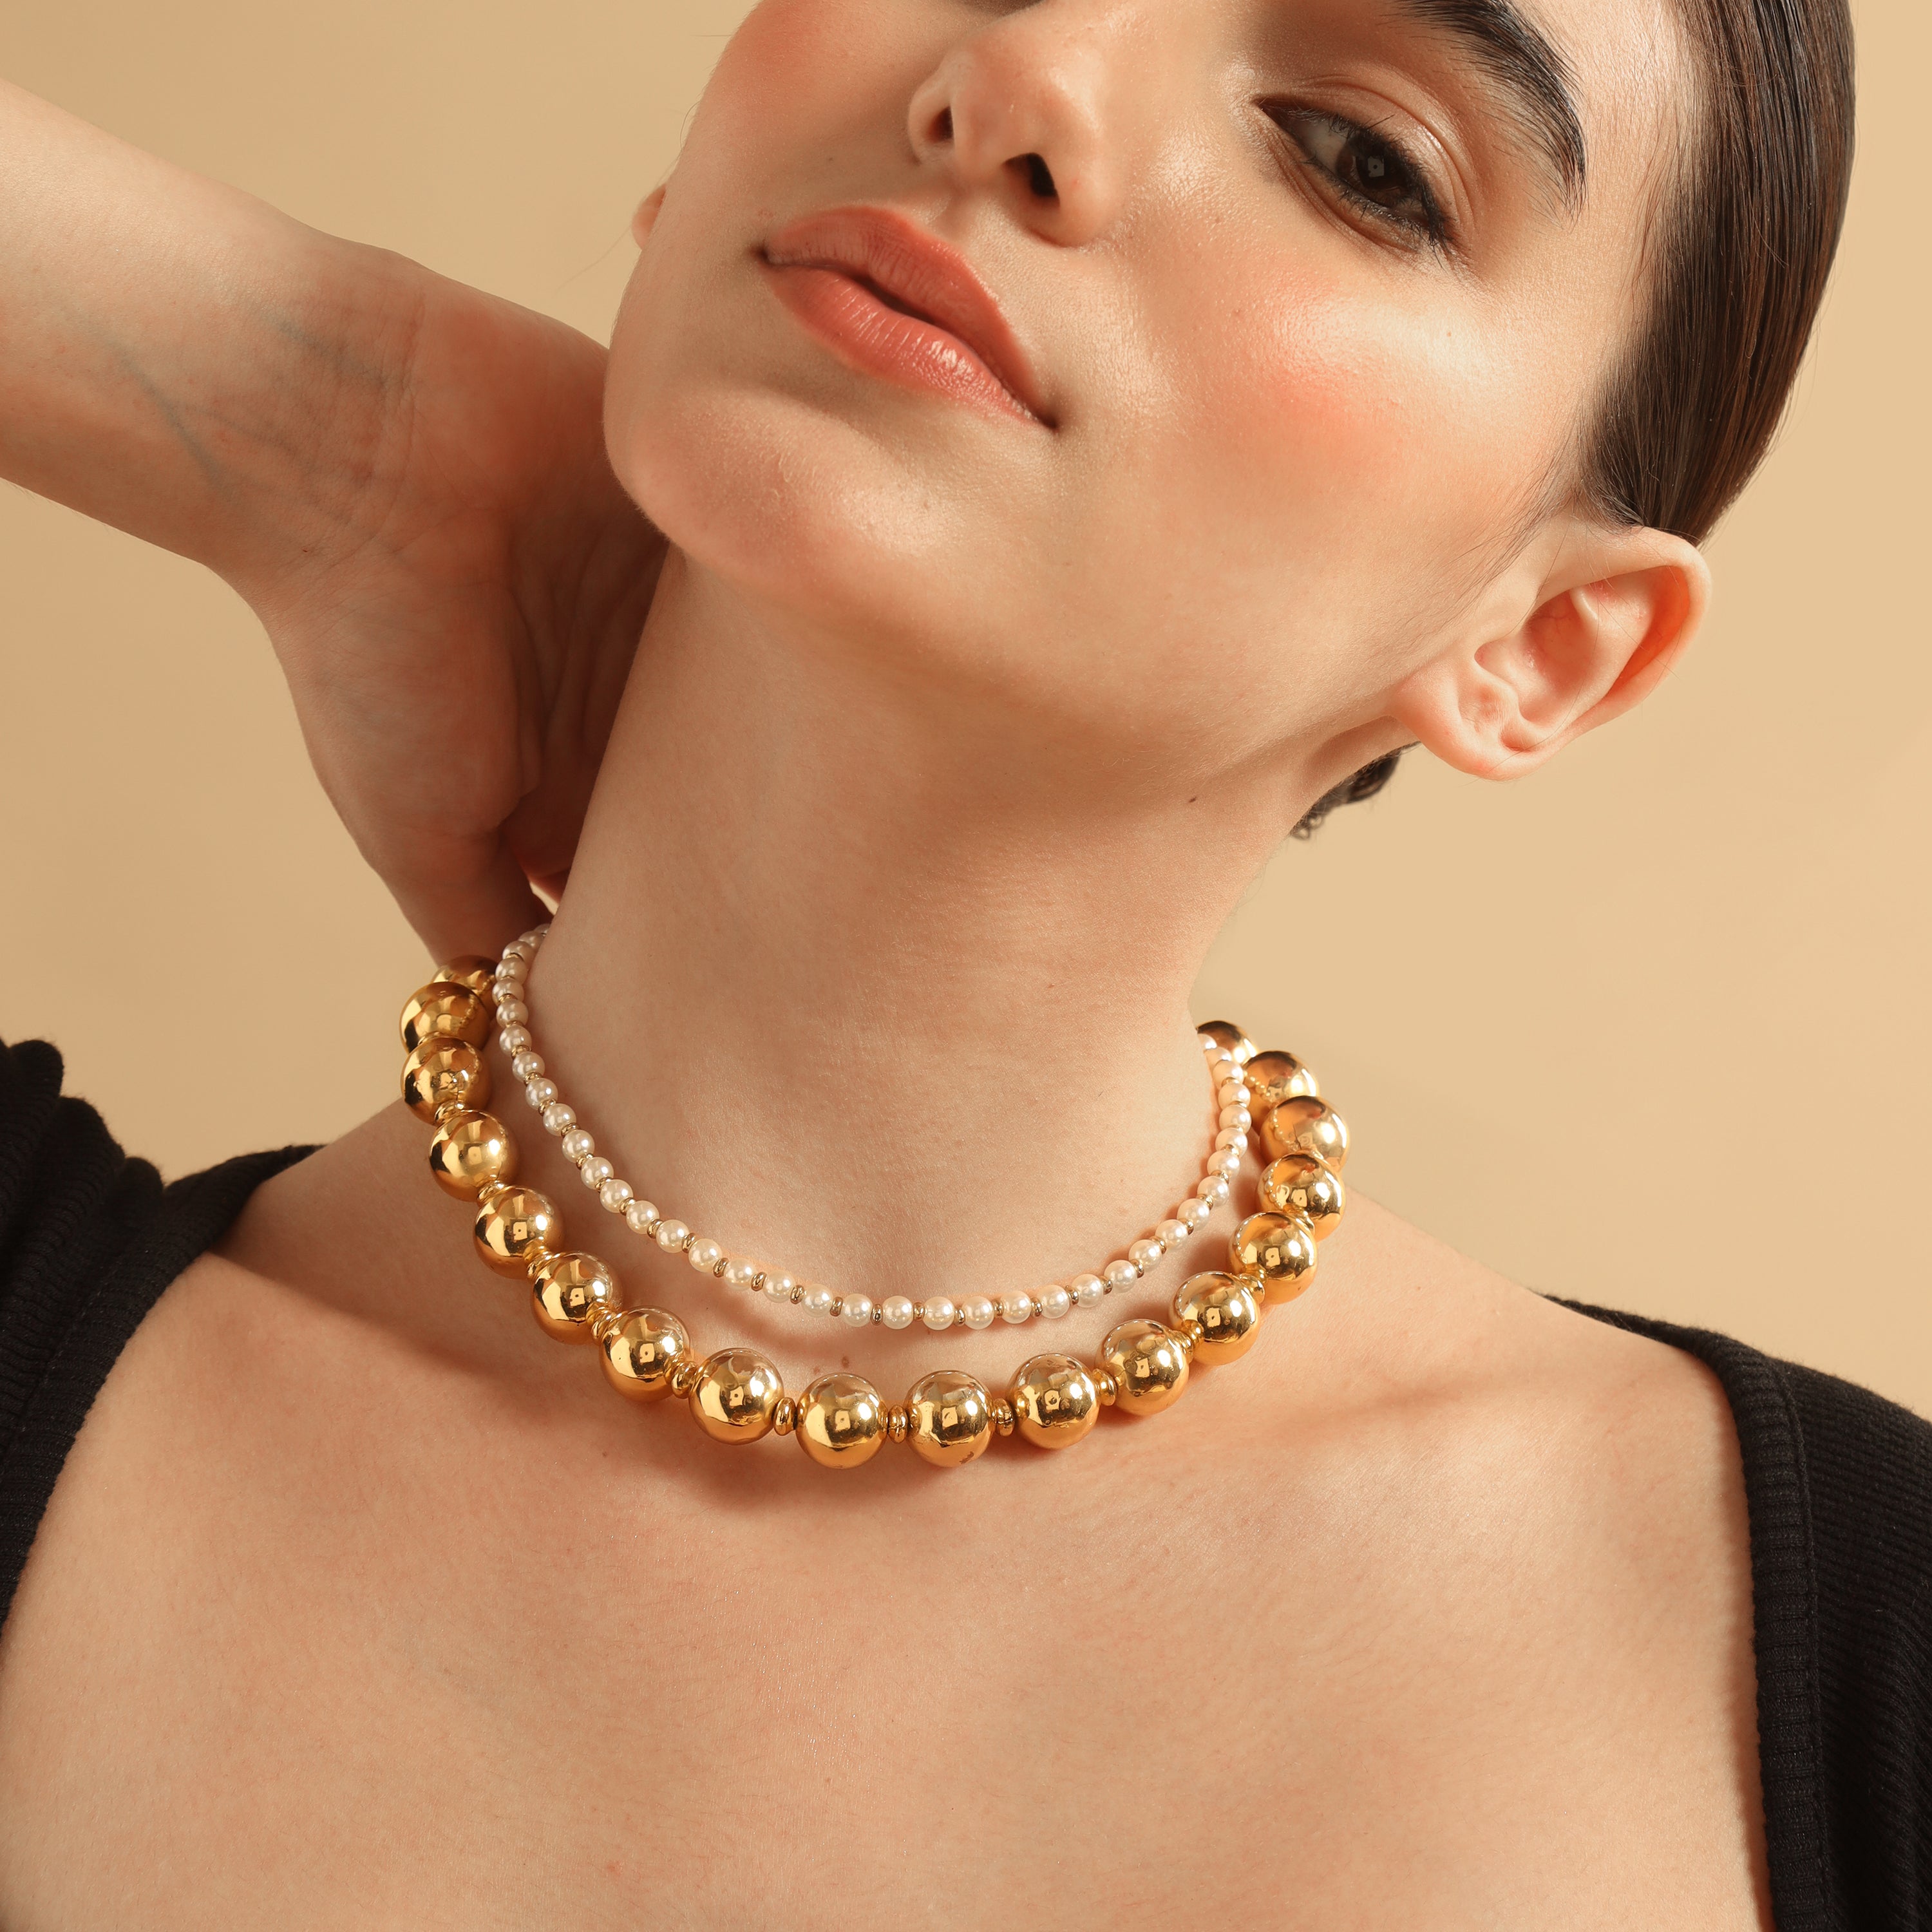 TFC Gold Beads and Pearl Layer Necklace-Enhance your elegance with our collection of gold-plated necklaces for women. Choose from stunning pendant necklaces, chic choker necklaces, and trendy layered necklaces. Our sleek and dainty designs are both affordable and anti-tarnish, ensuring lasting beauty. Enjoy the cheapest fashion jewellery, lightweight and stylish- only at The Fun Company.